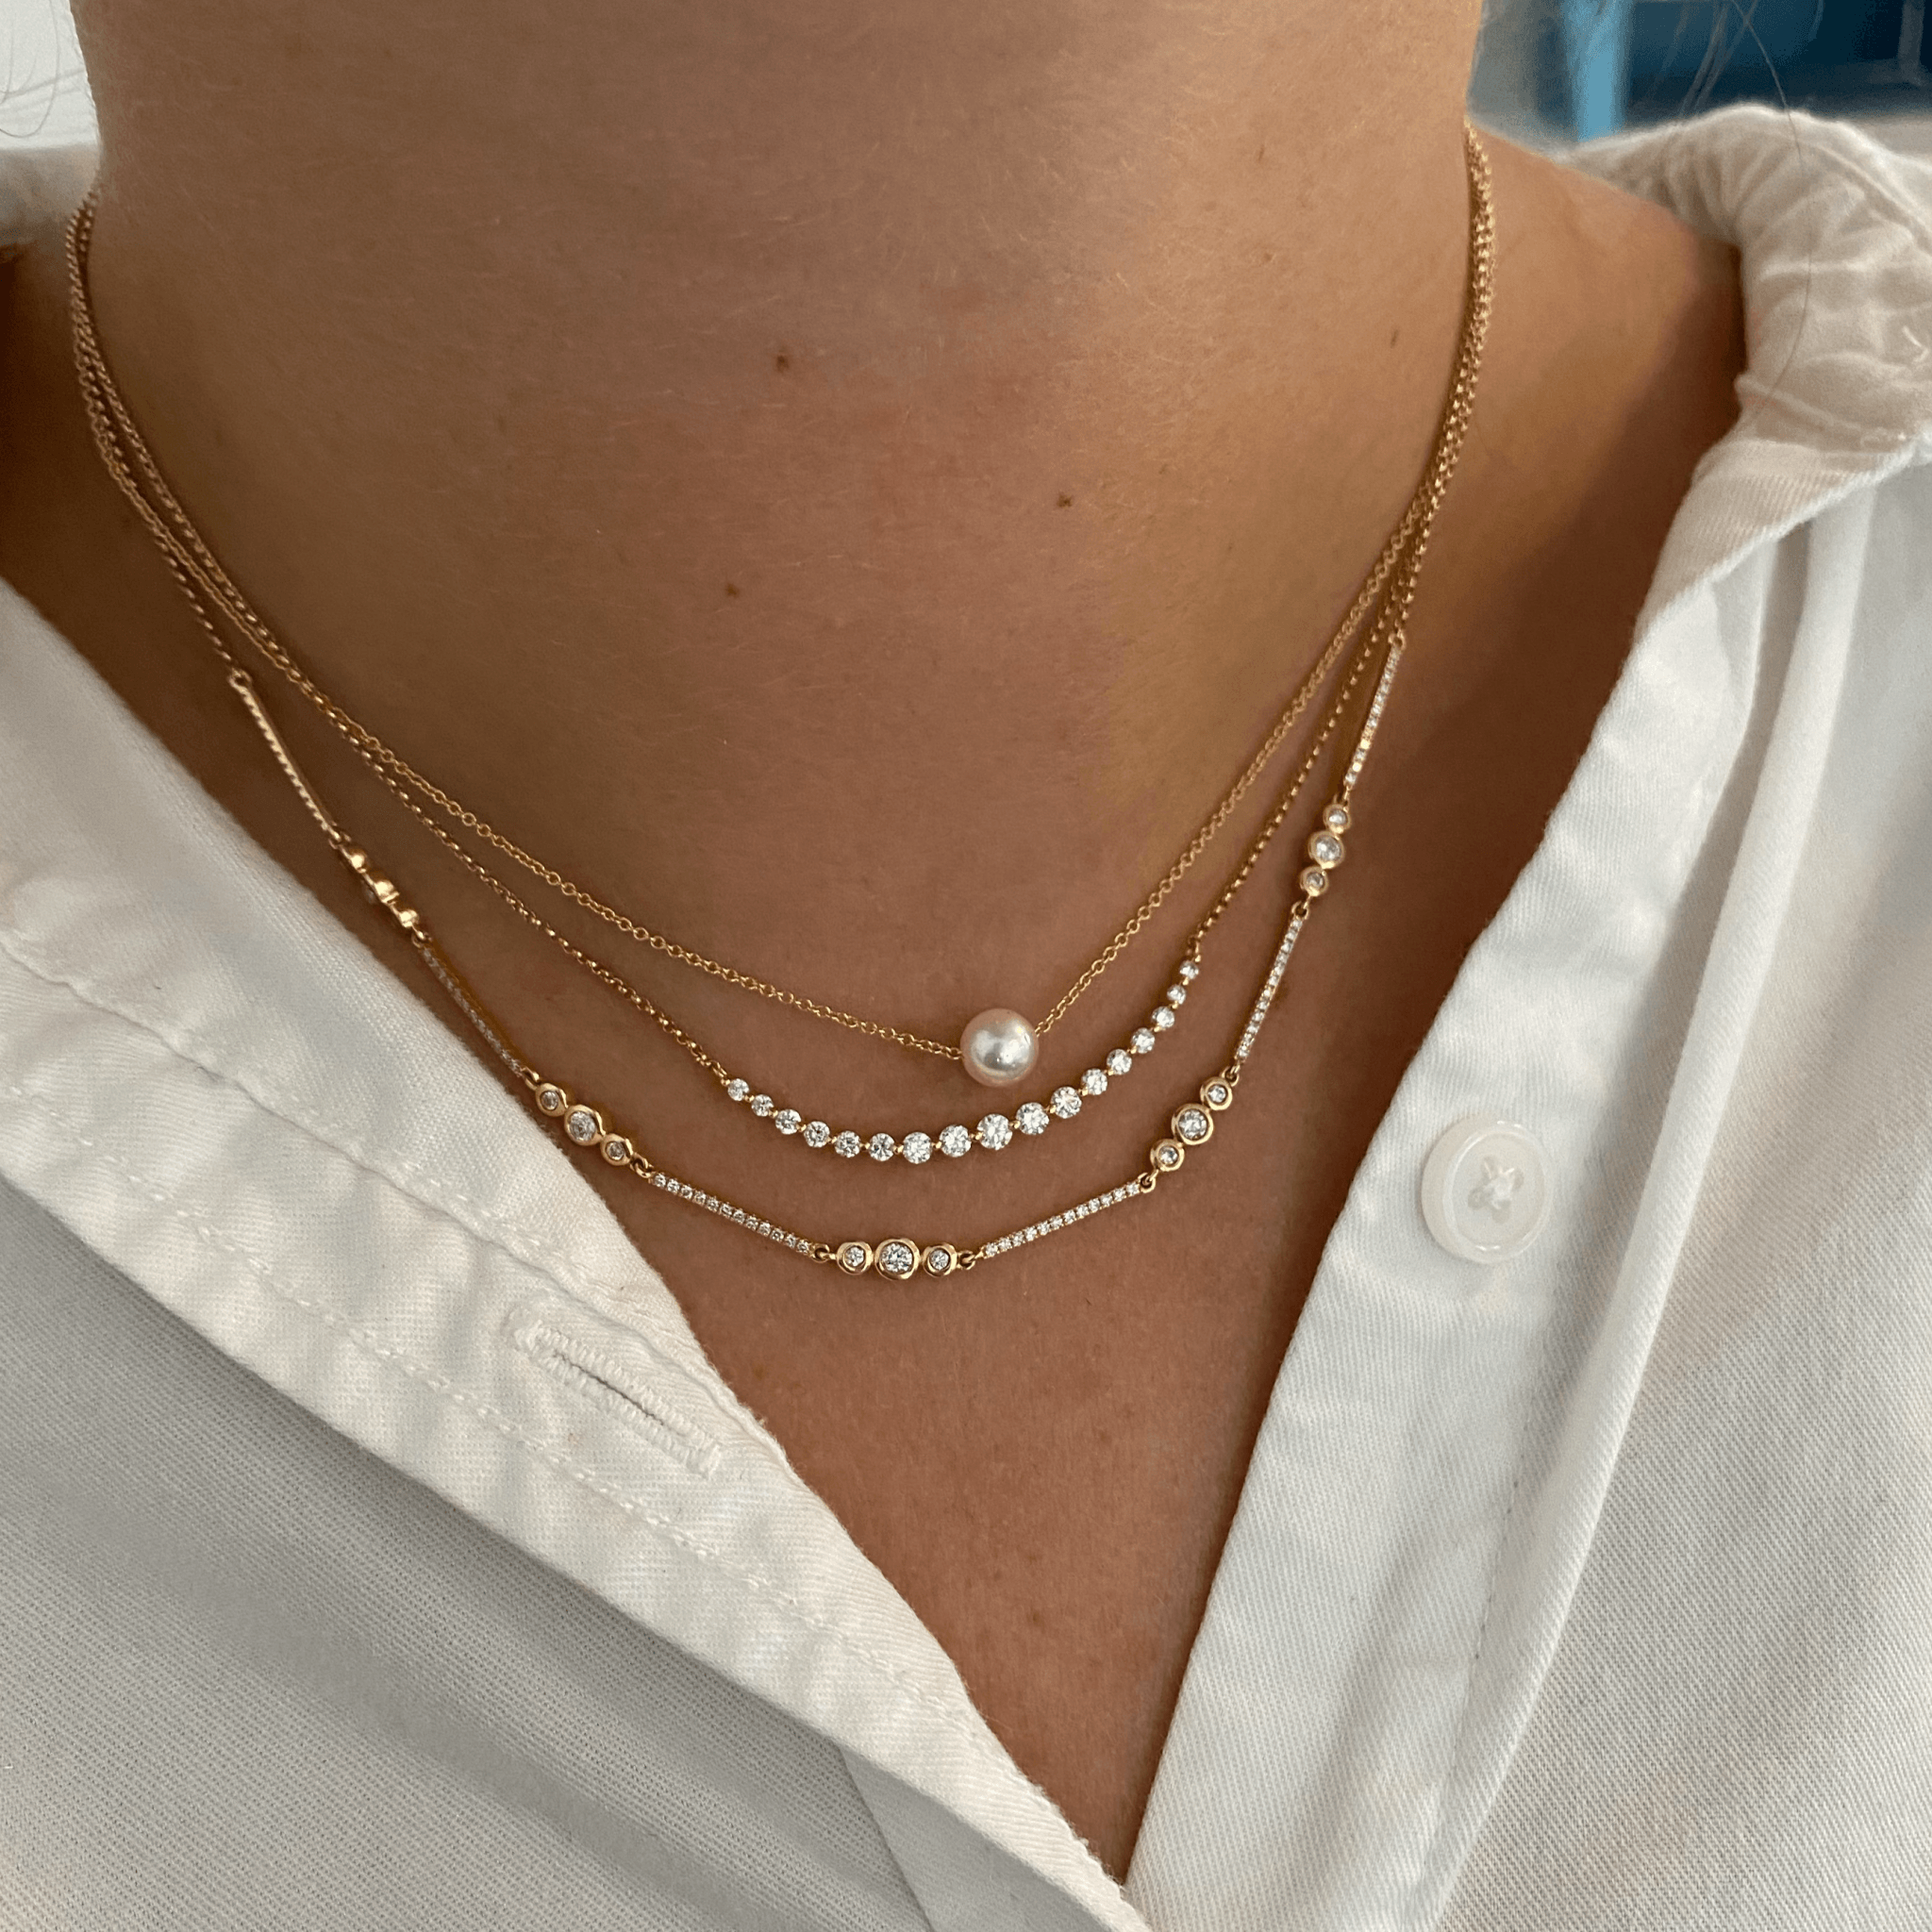 Hollywood's most fashionable men are wearing pearl necklaces | Guys wearing  pearls, Men wearing pearls, Mens accessories fashion